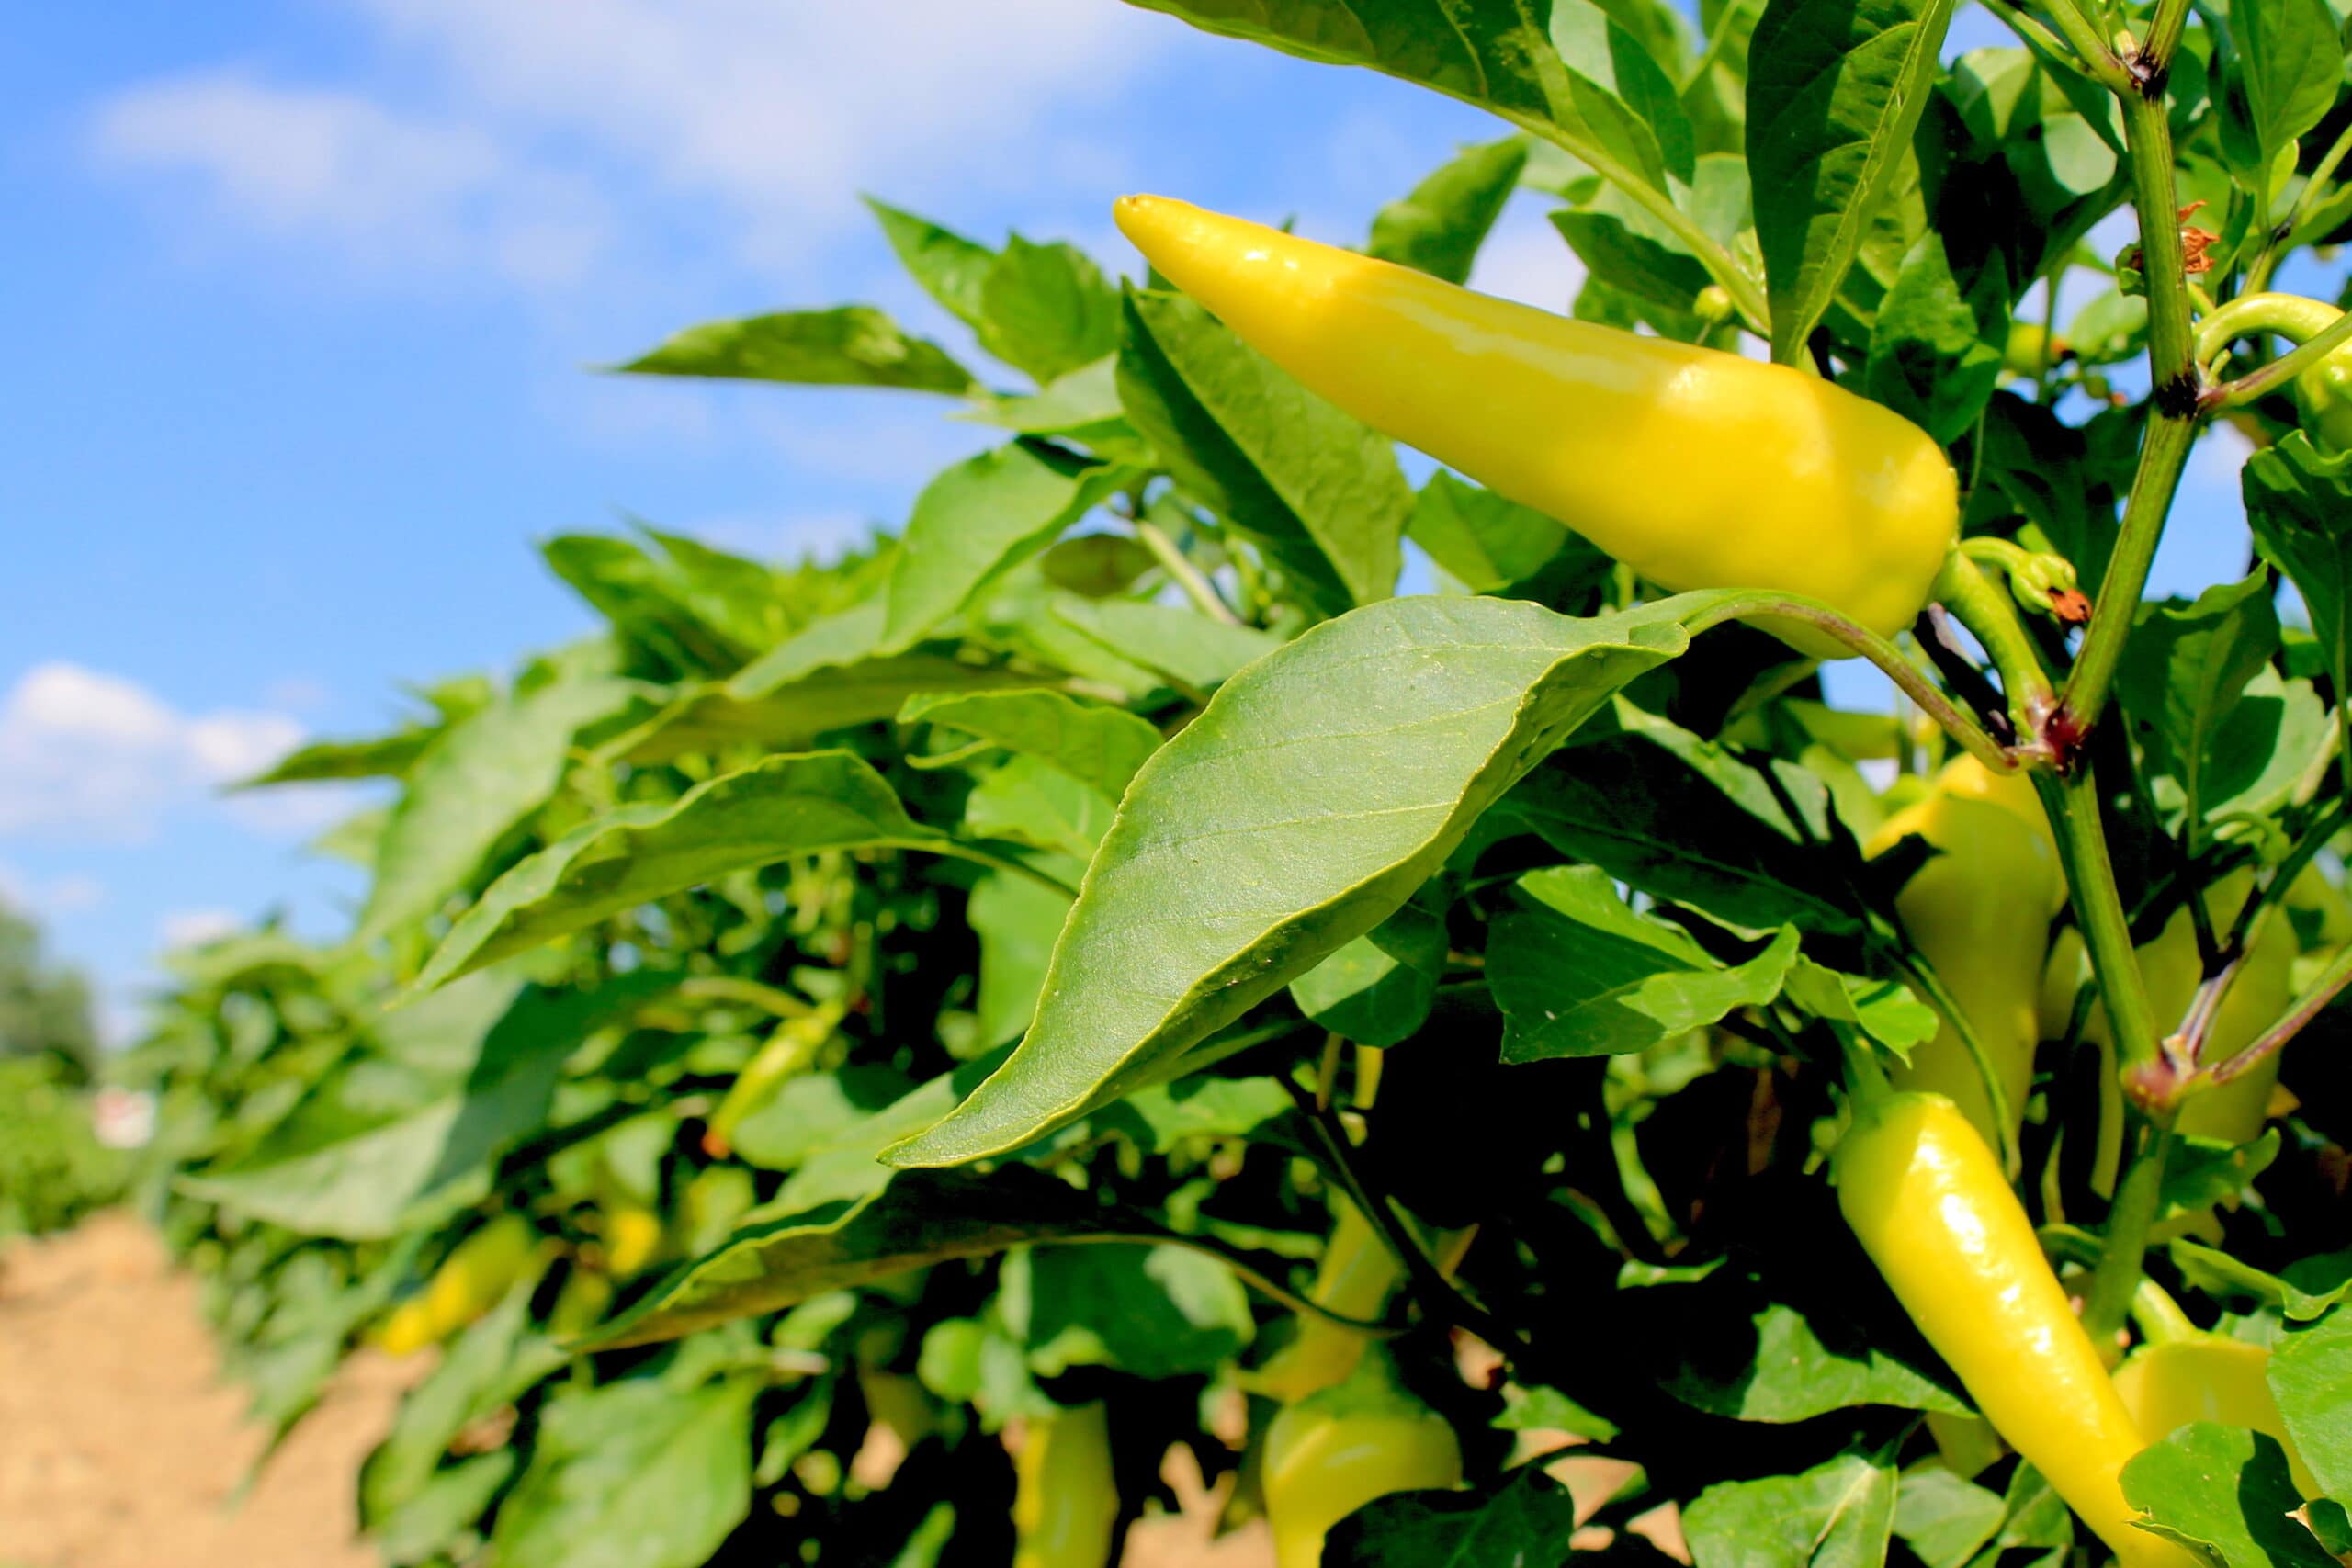 Gorgeous banana peppers reaching for the sun.